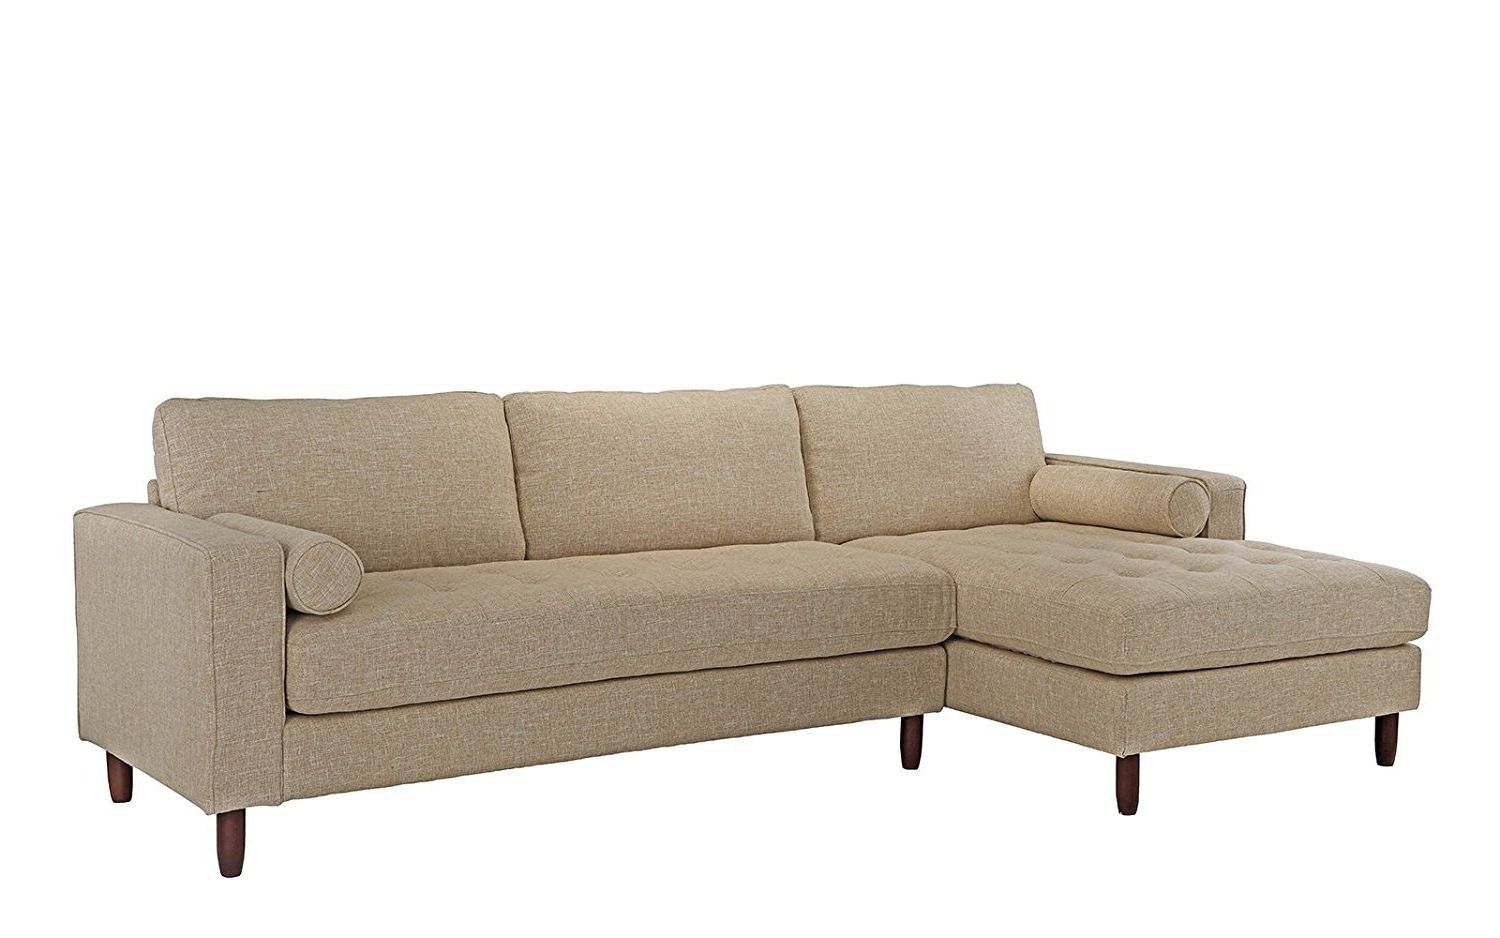 Beige L Shaped Sectional Sofas Inside Latest Mid Century Modern Tufted Fabric Sectional Sofa, L Shape Couch Beige (View 10 of 15)